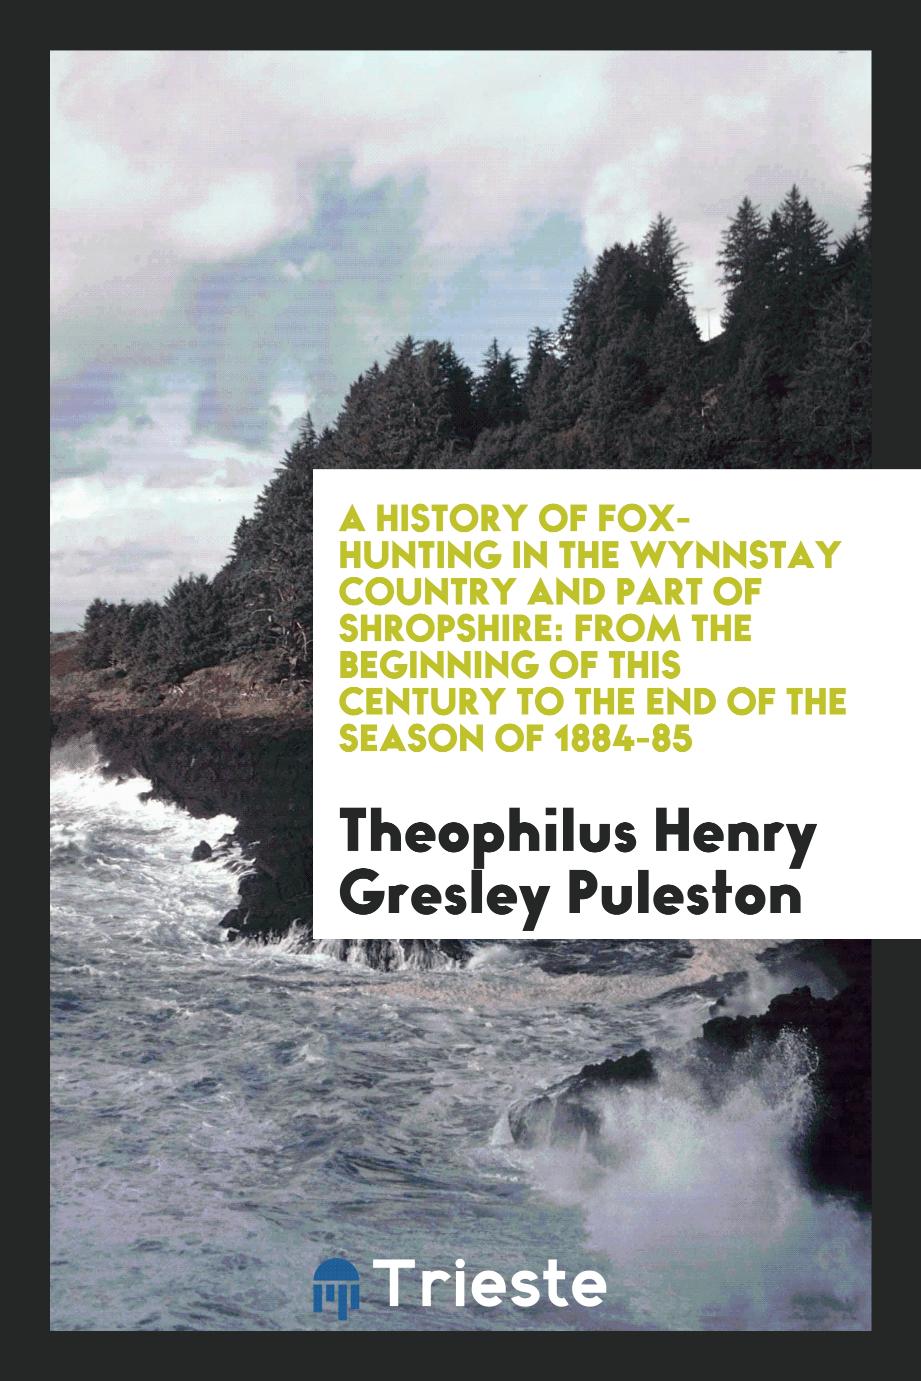 A History of Fox-Hunting in the Wynnstay Country and Part of Shropshire: From the Beginning of This Century to the End of the Season of 1884-85